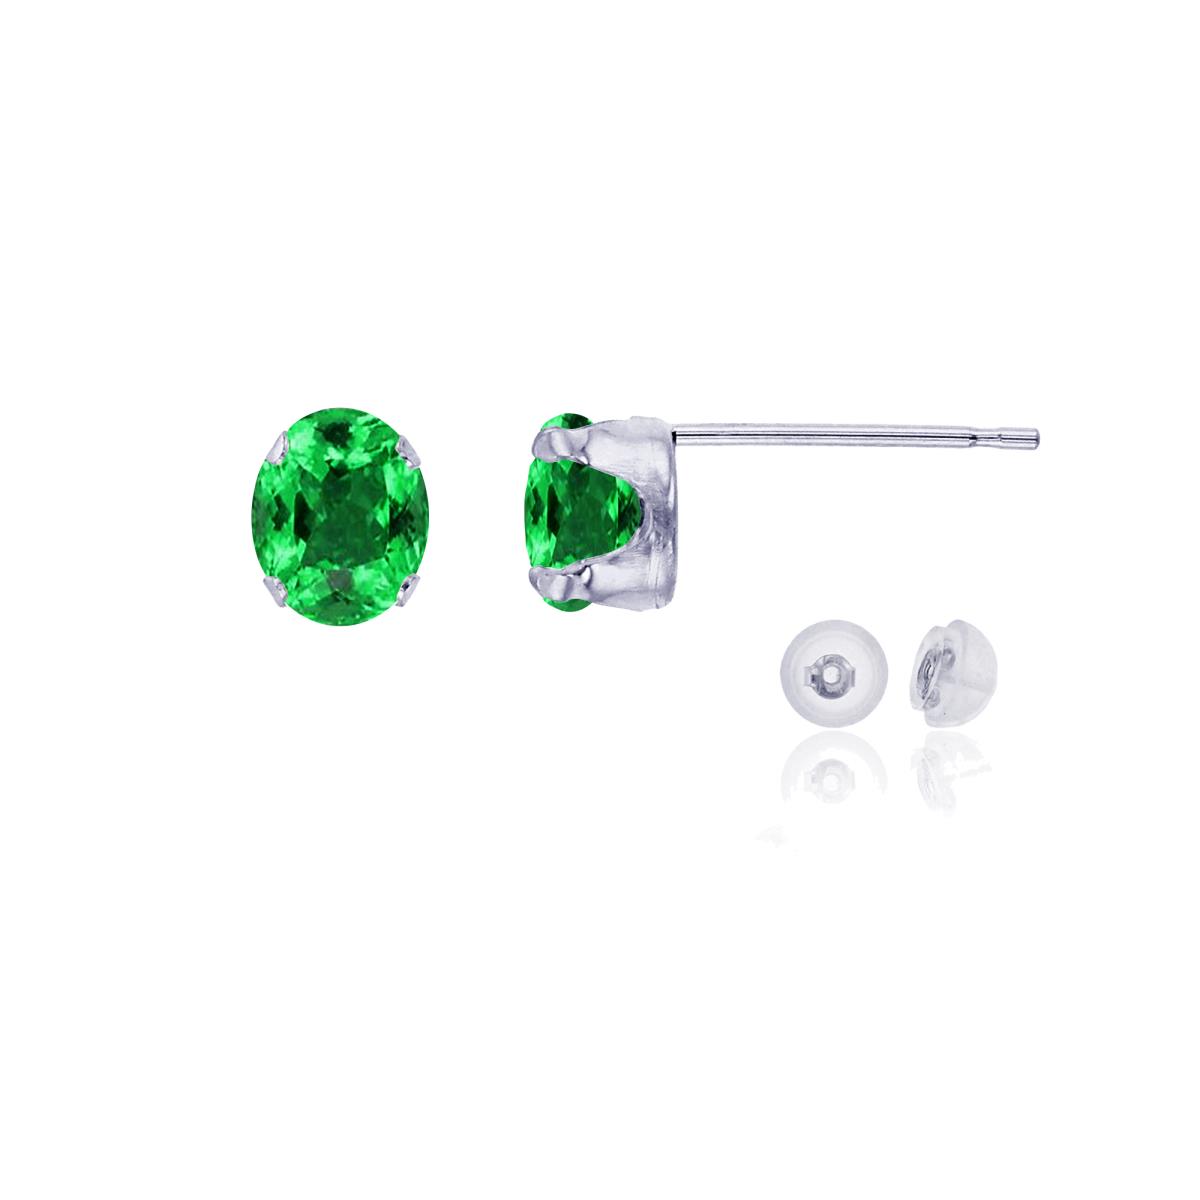 14K White Gold 6x4mm Oval Emerald Stud Earring with Silicone Back